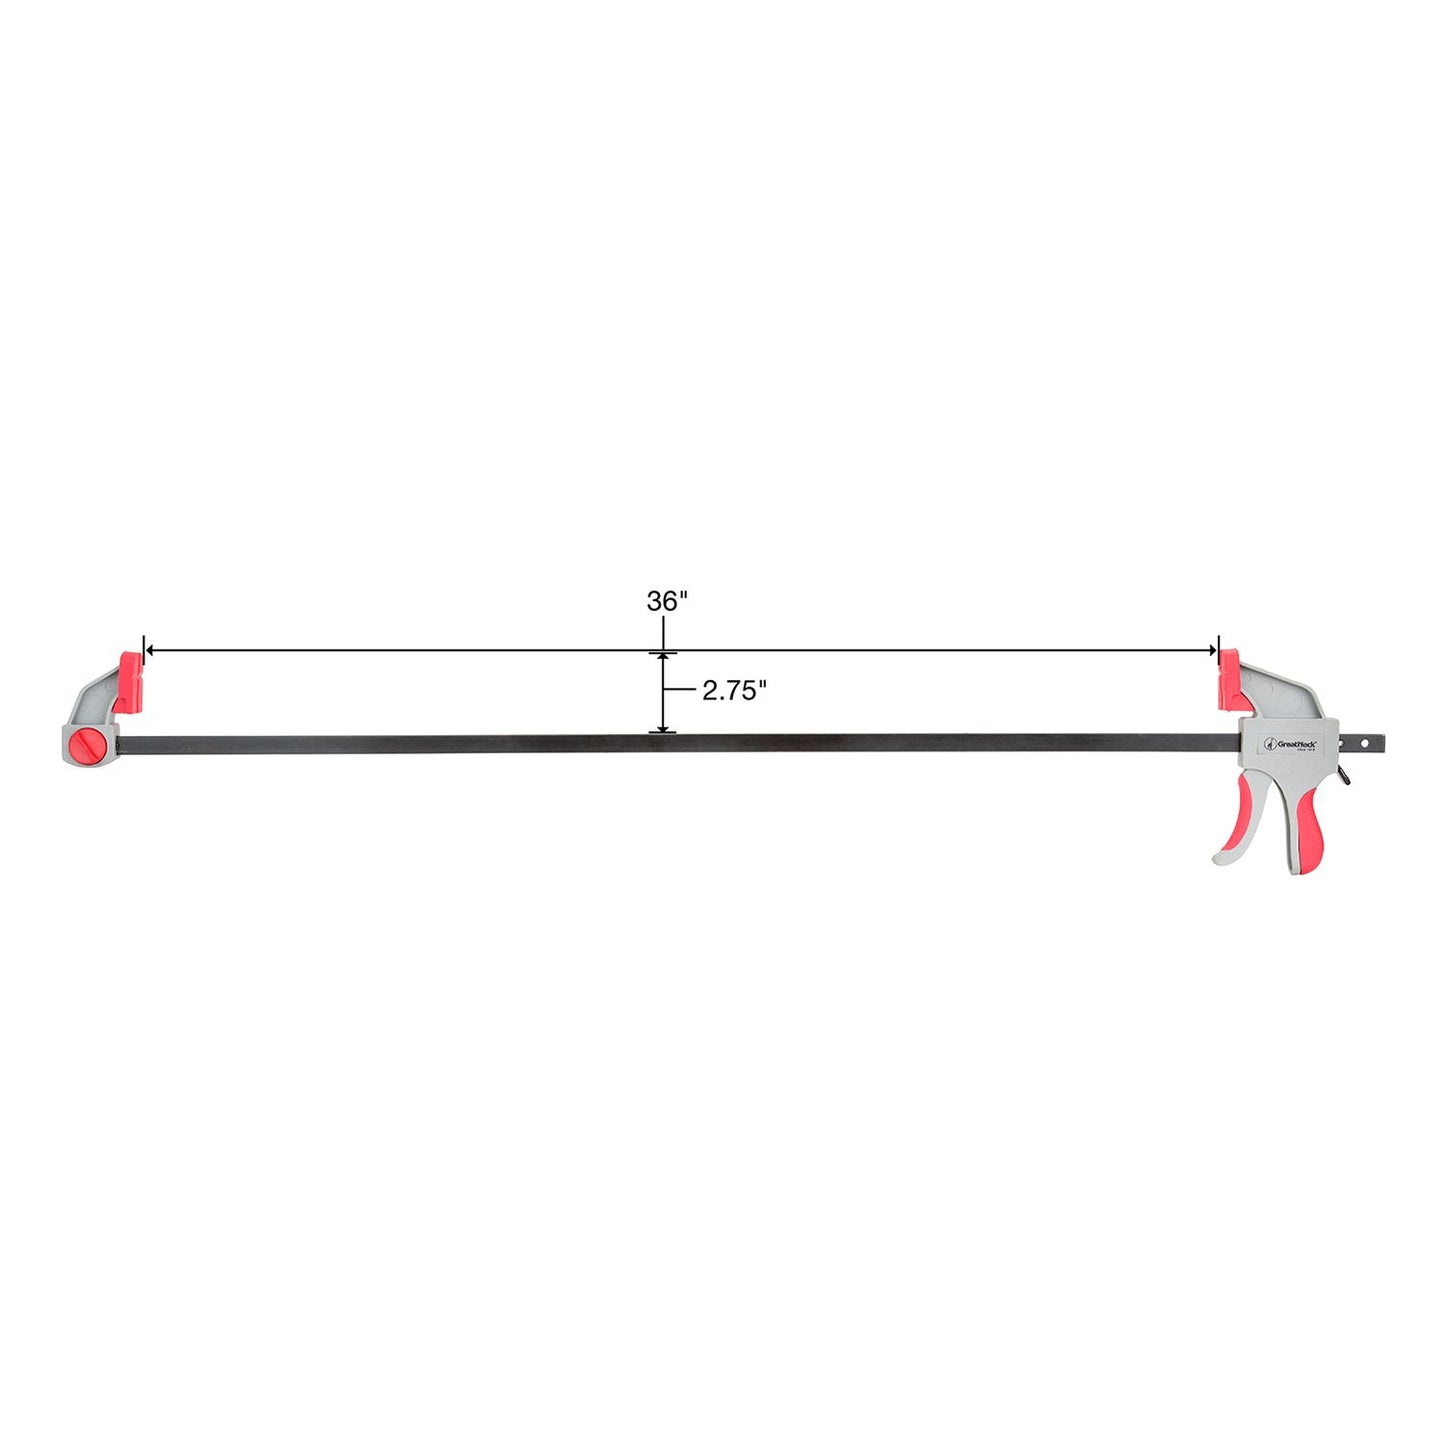 Greatneck Ratcheting 36" Bar Clamp